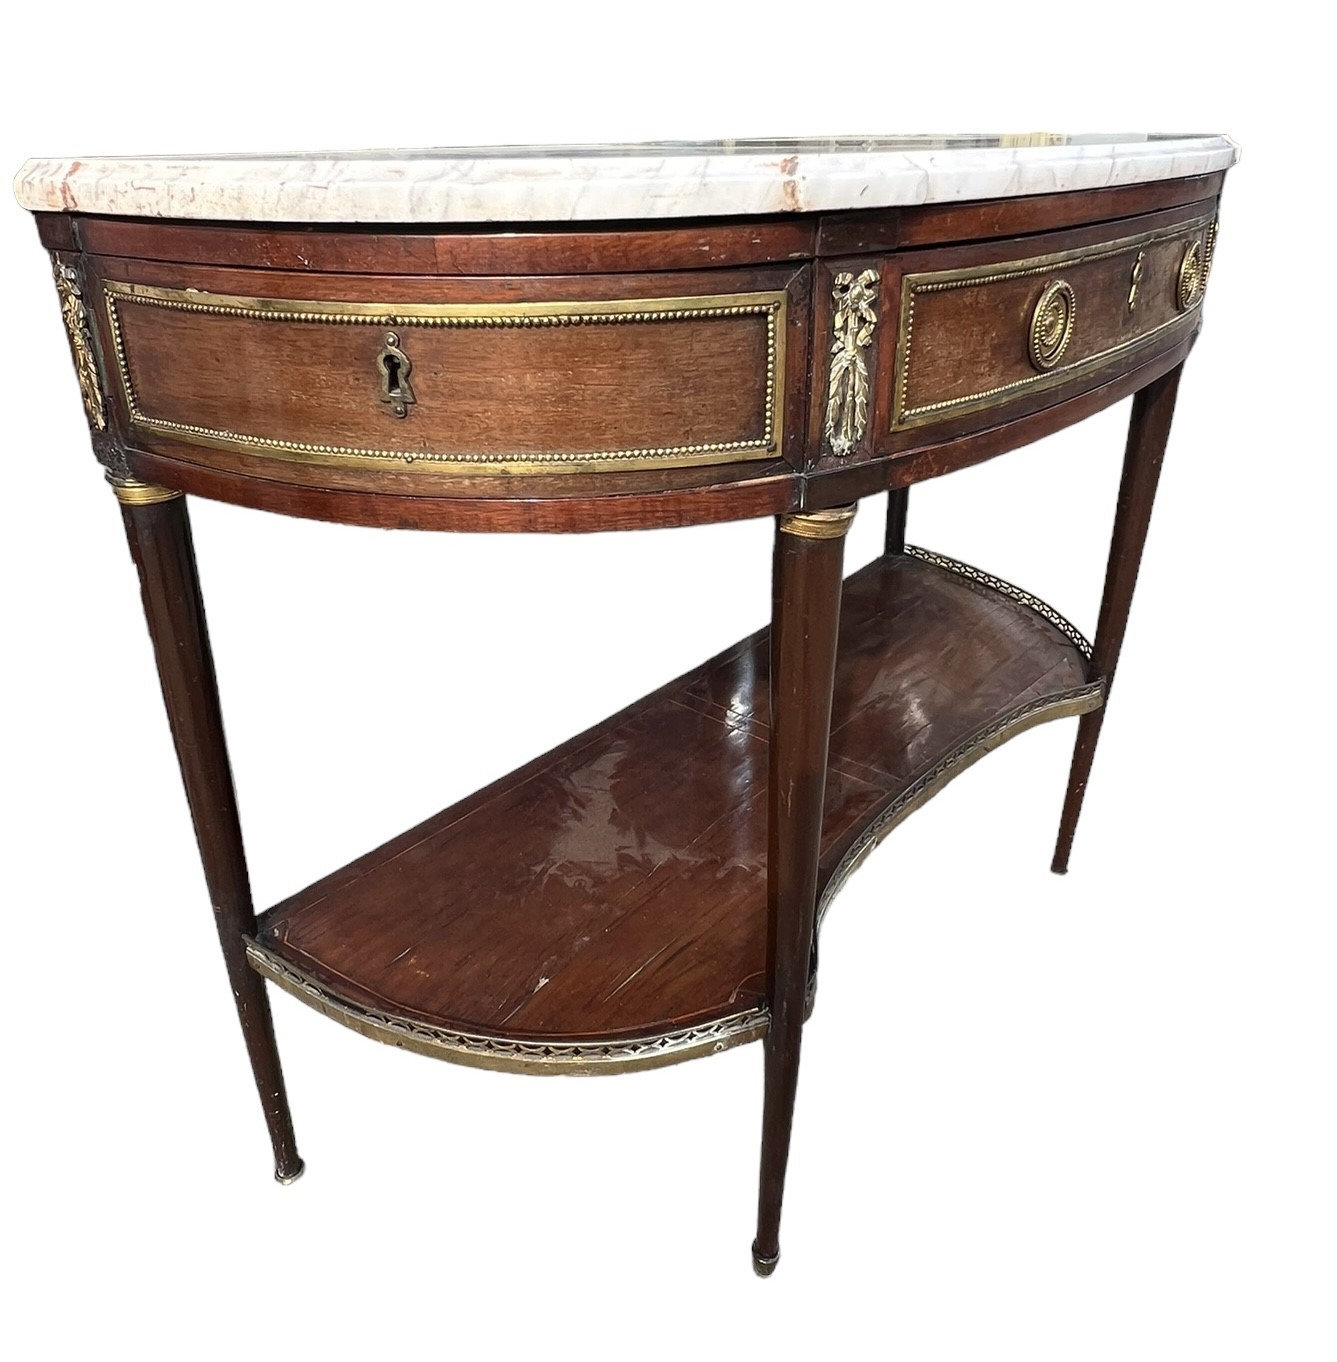 AN 18TH CENTURY FRENCH LOUIS XI PERIOD MAHOGANY AND GILT METAL MOUNTED DESSERT CONSOLE TABLE - Image 4 of 9